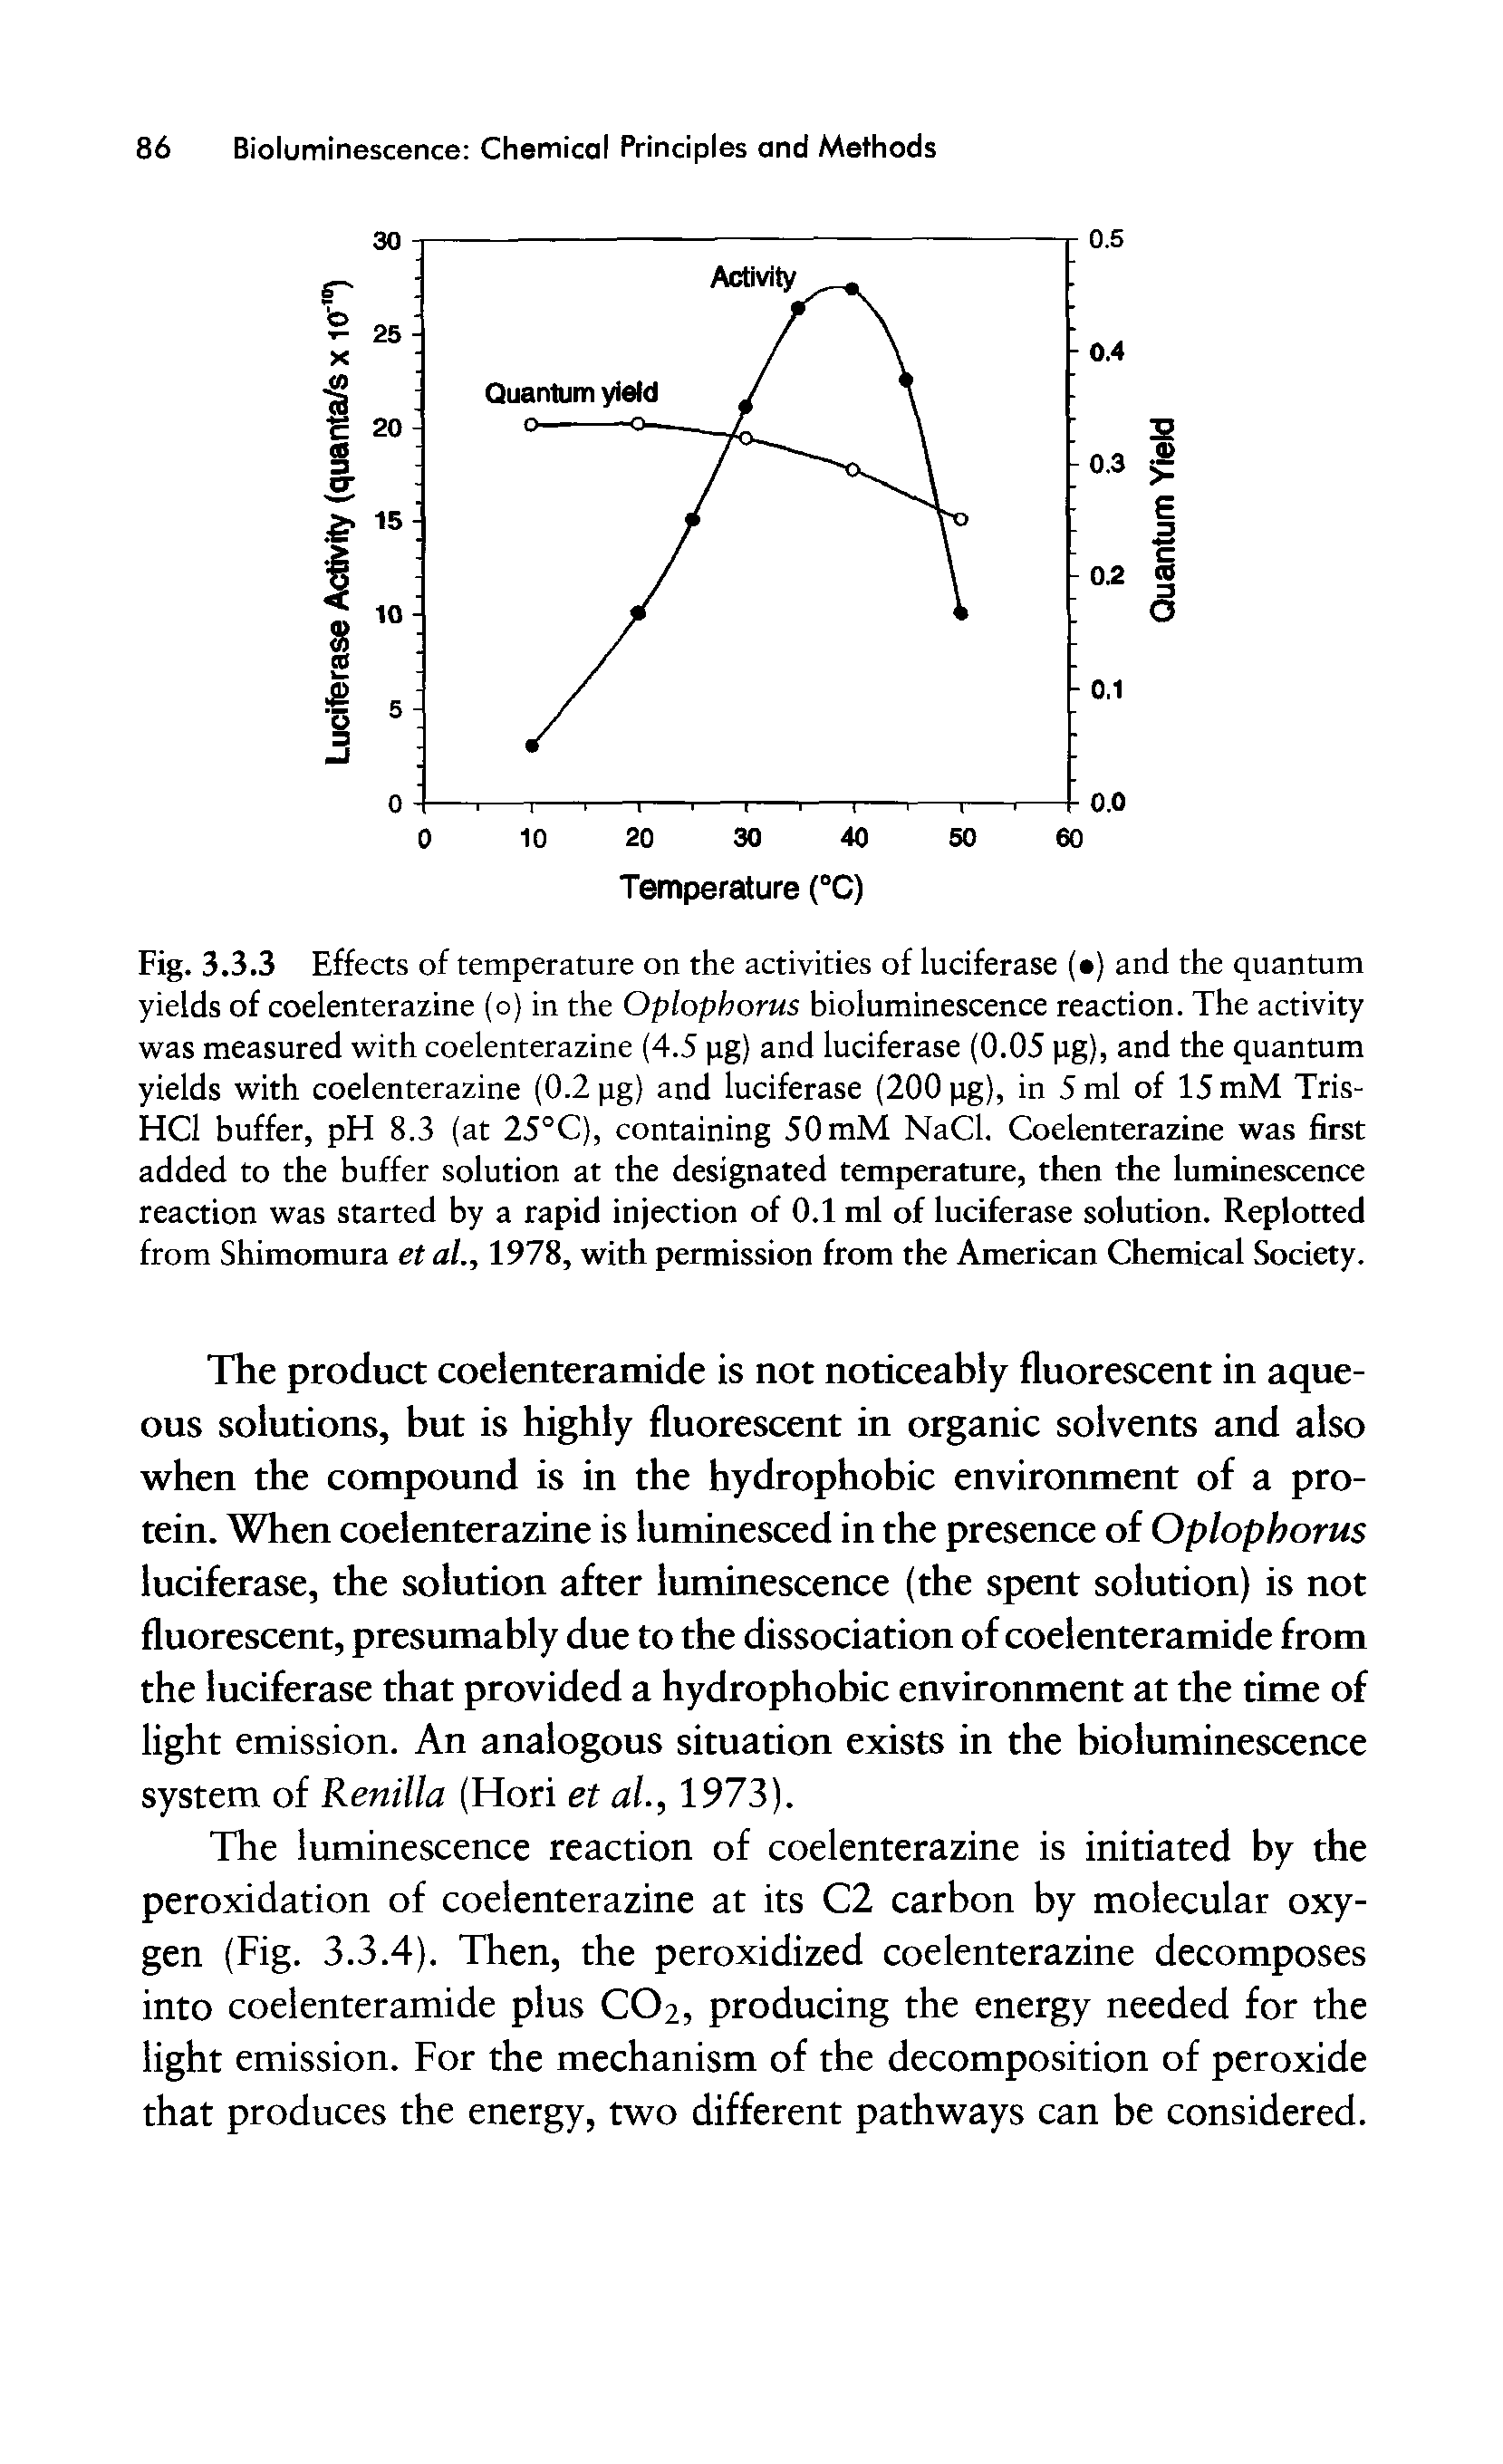 Fig. 3.3.3 Effects of temperature on the activities of luciferase ( ) and the quantum yields of coelenterazine (o) in the Oplophorus bioluminescence reaction. The activity was measured with coelenterazine (4.5 pg) and luciferase (0.05 pg), and the quantum yields with coelenterazine (0.2 pg) and luciferase (200 pg), in 5 ml of 15 mM Tris-HC1 buffer, pH 8.3 (at 25°C), containing 50 mM NaCl. Coelenterazine was first added to the buffer solution at the designated temperature, then the luminescence reaction was started by a rapid injection of 0.1 ml of luciferase solution. Replotted from Shimomura et al., 1978, with permission from the American Chemical Society.